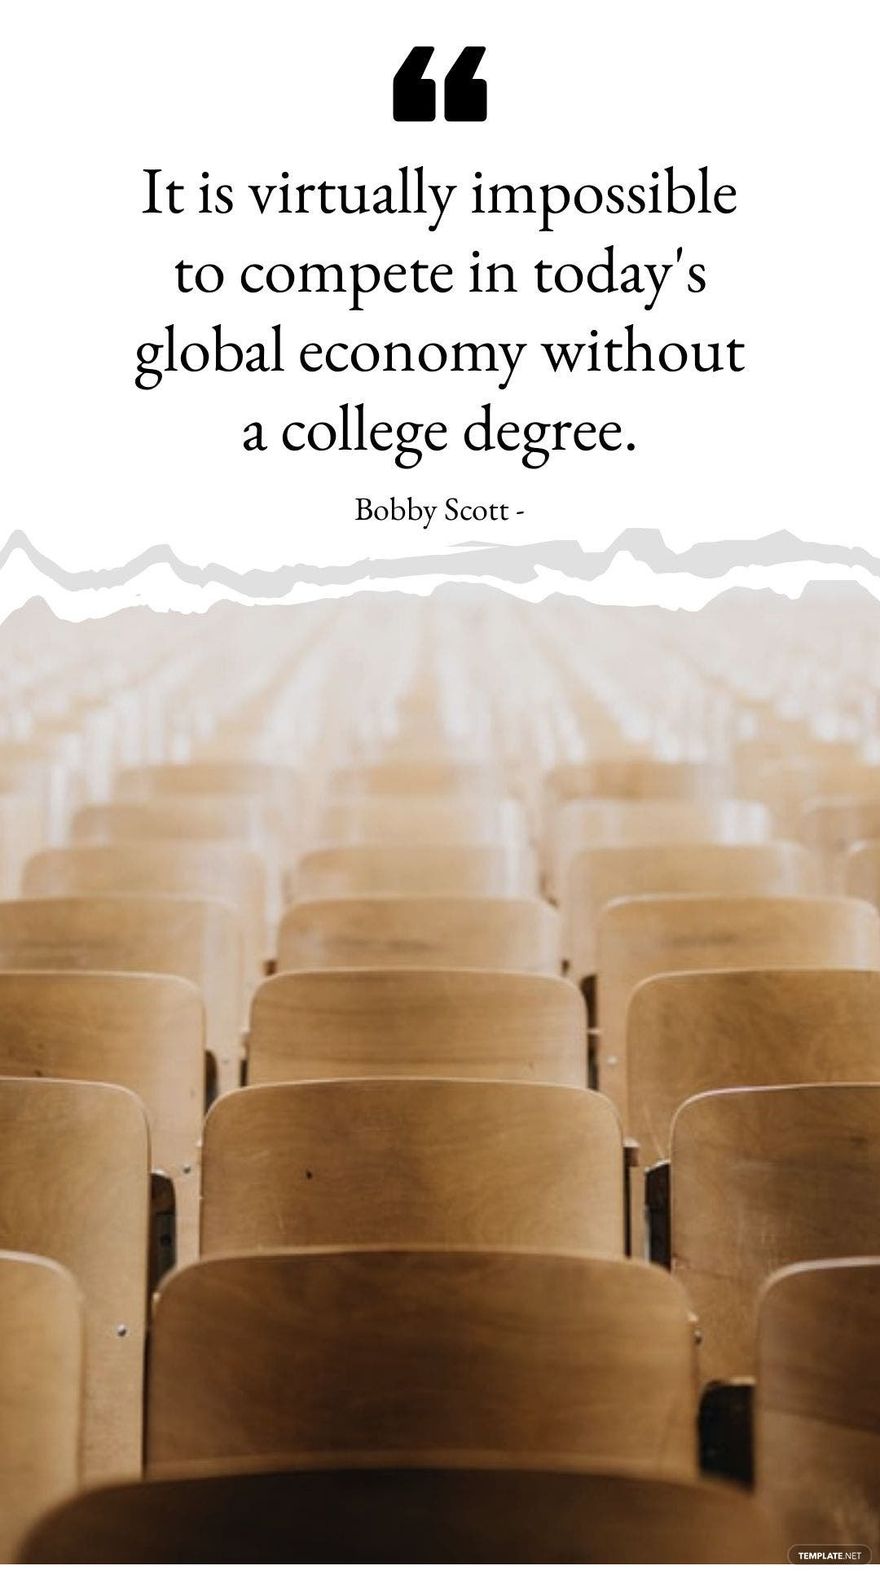 Free Bobby Scott - It is virtually impossible to compete in today's global economy without a college degree. in JPG